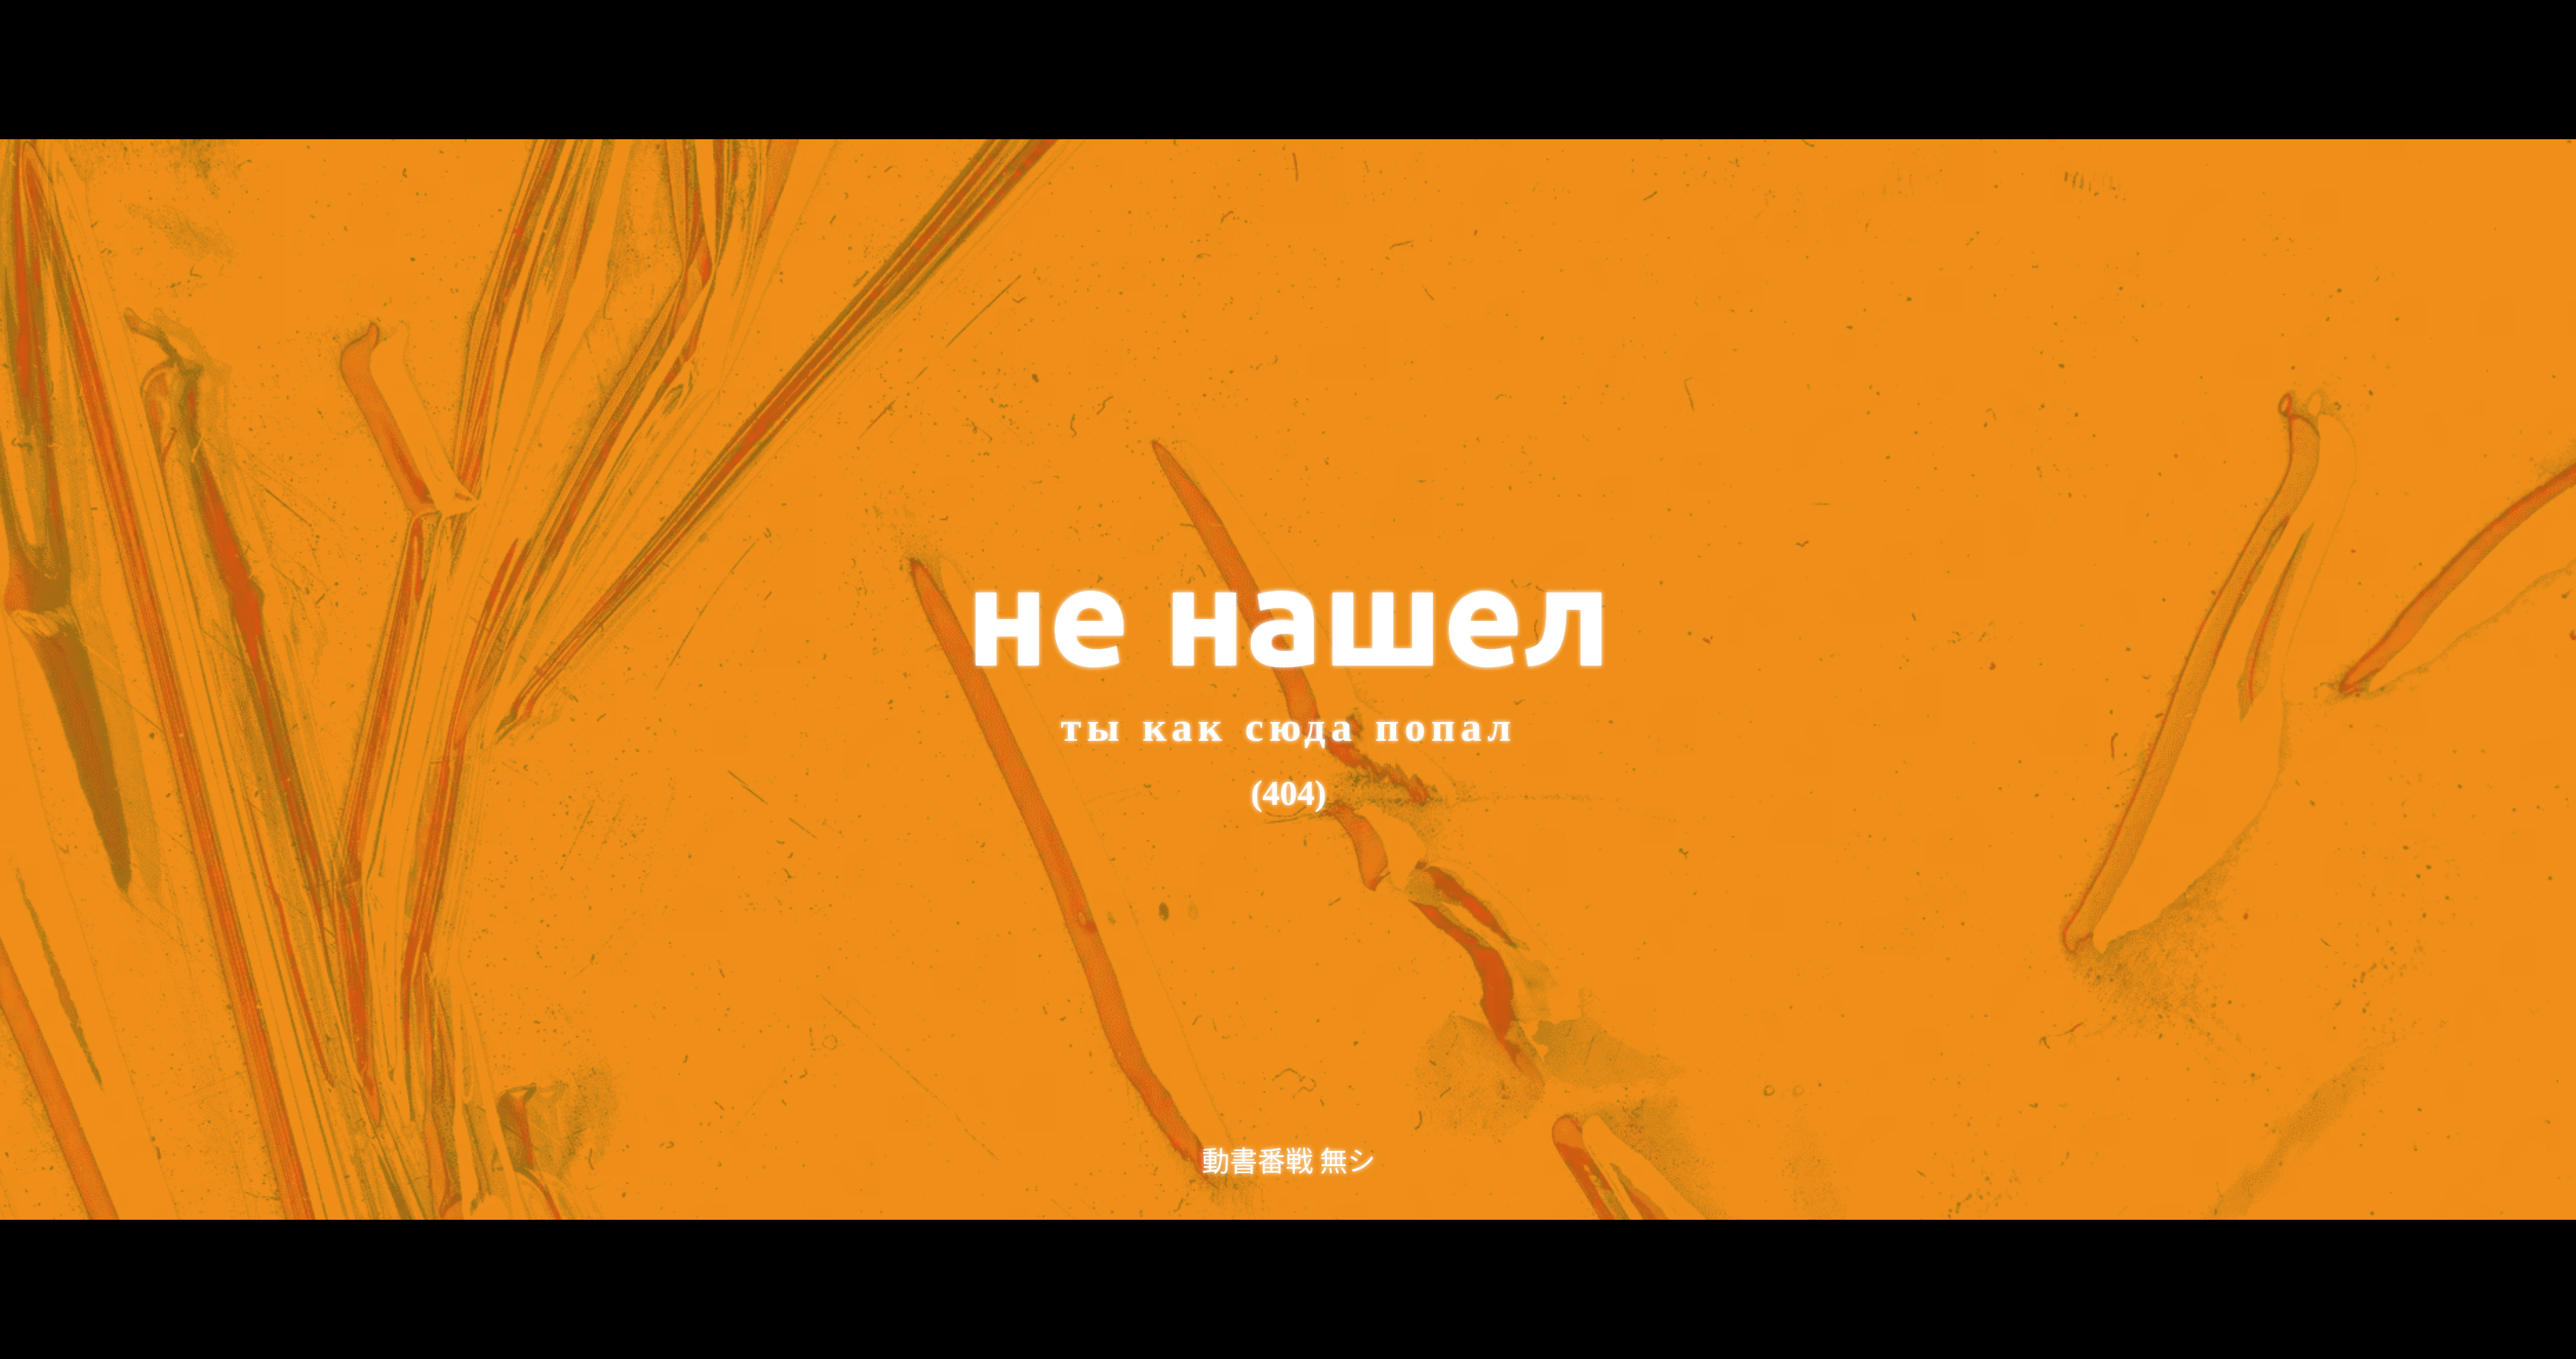 Errors Internet Code Russian Graphic Design Text Bright Yellow 404 Not Found White Text 3700x1952